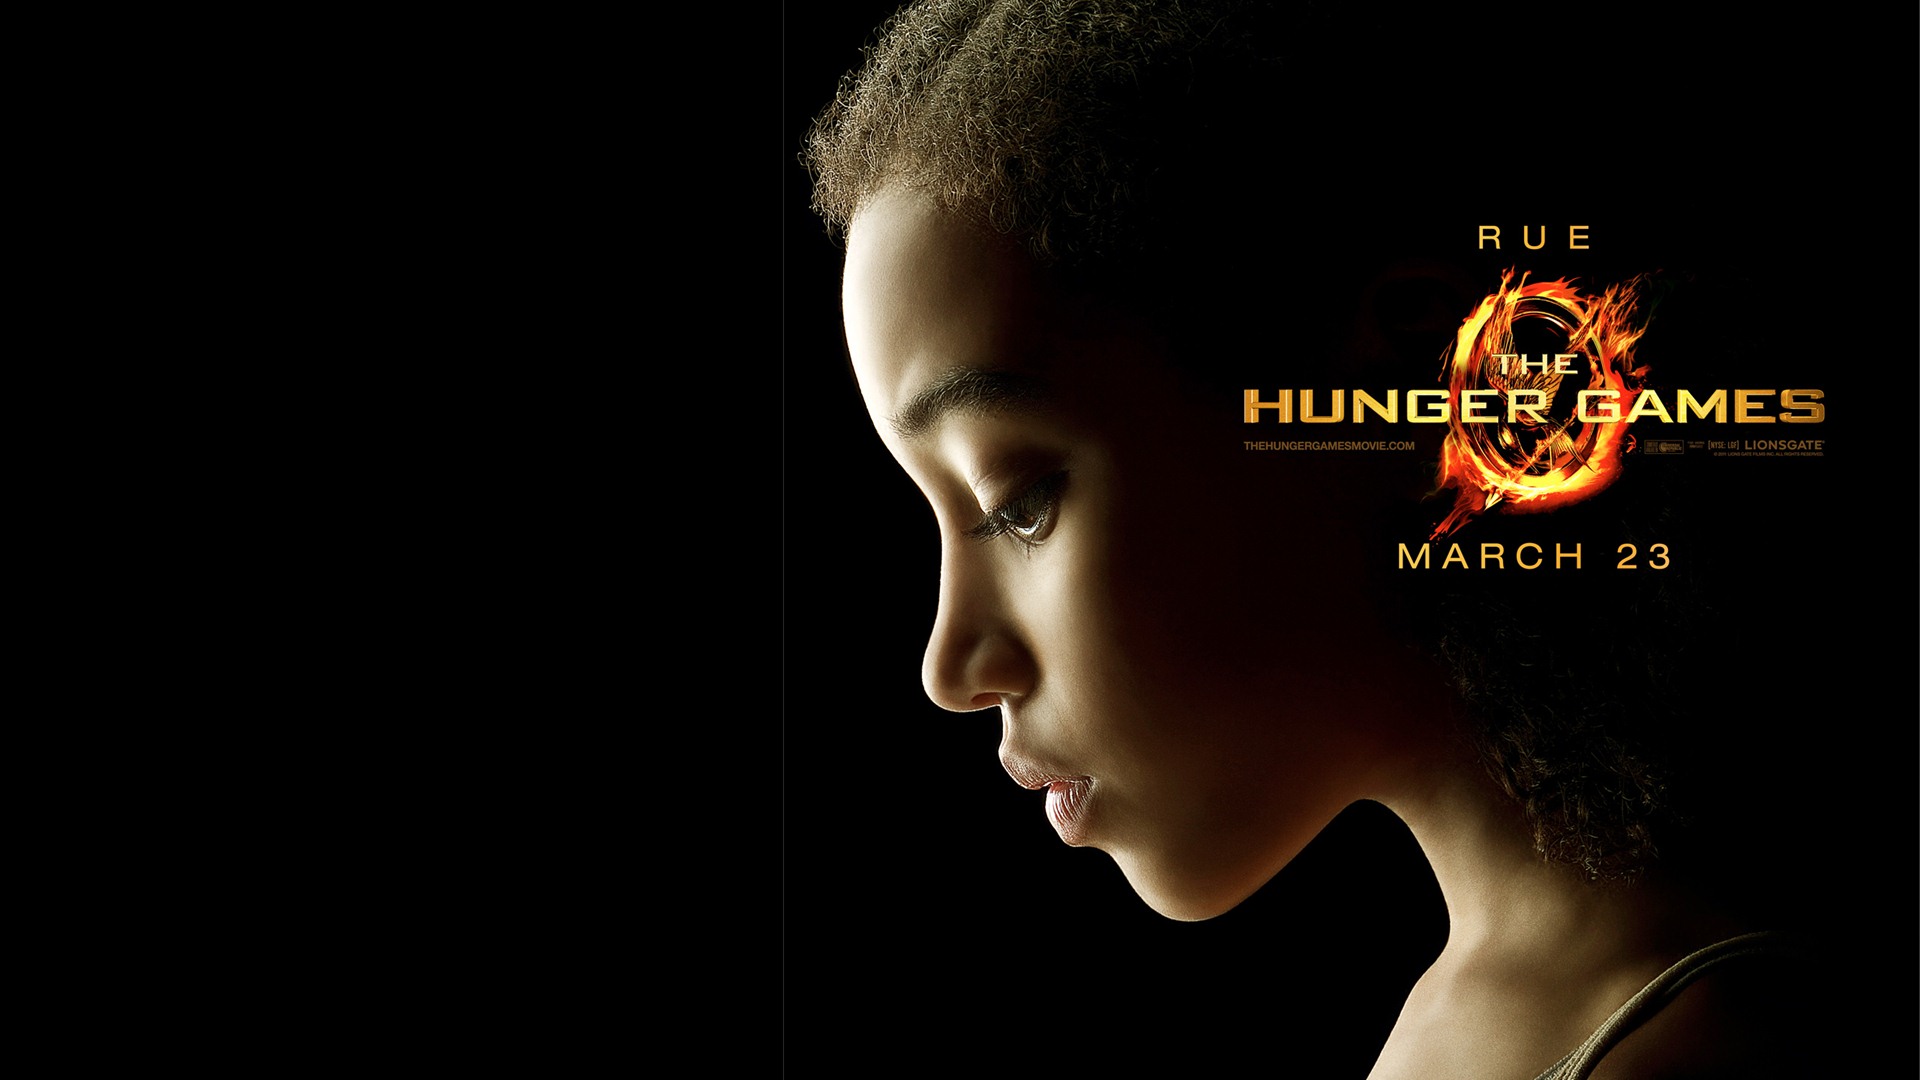 The Hunger Games HD wallpapers #2 - 1920x1080